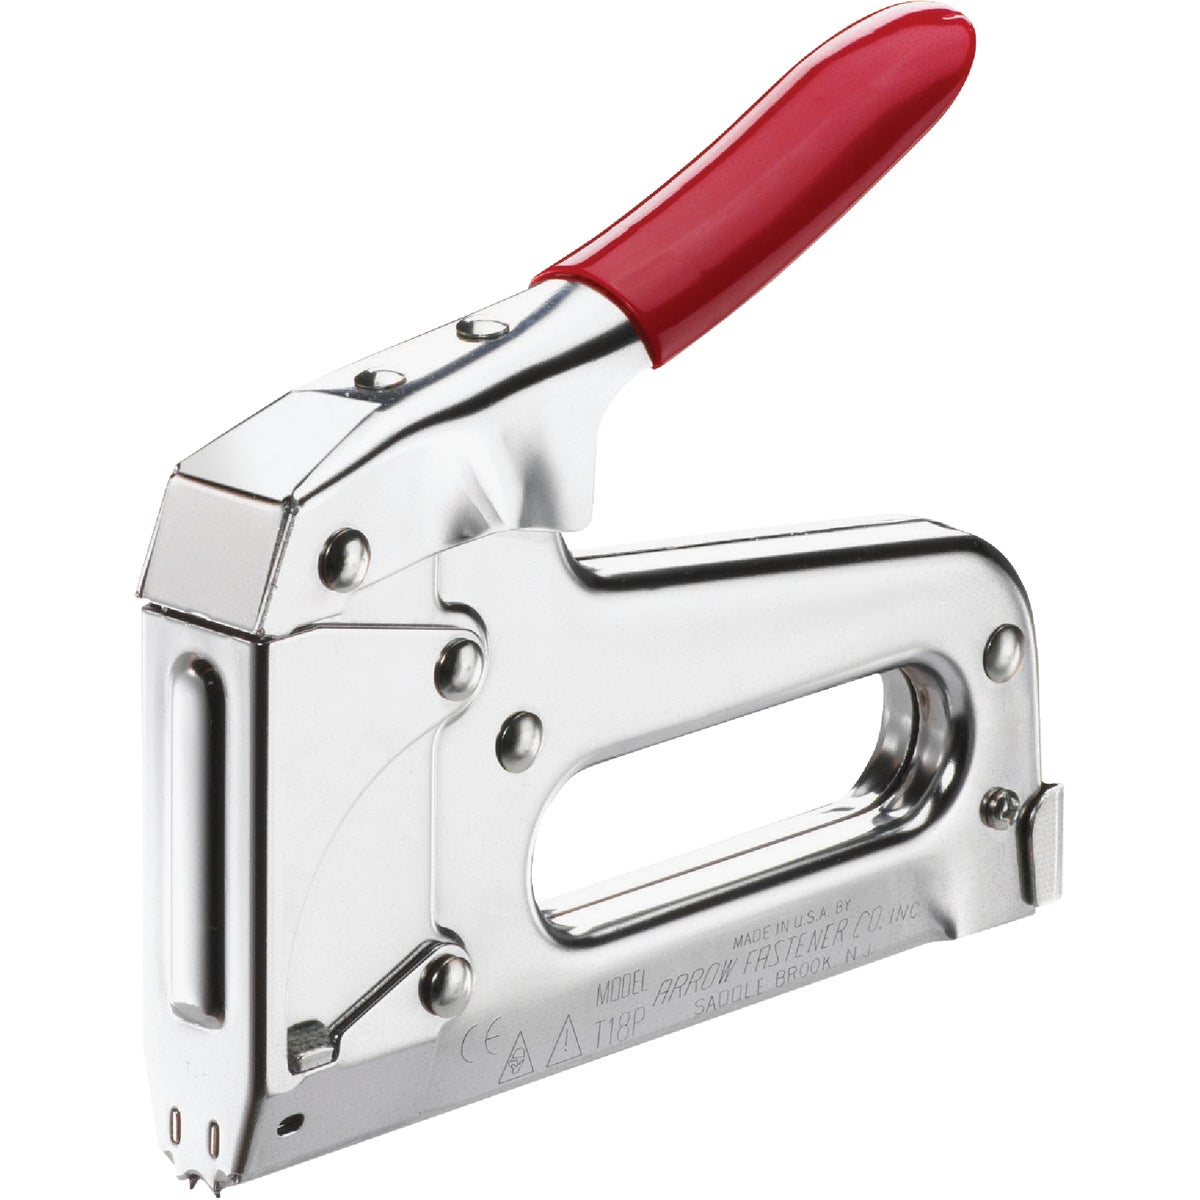 Arrow T18 Professional Wire and Cable Staple Gun